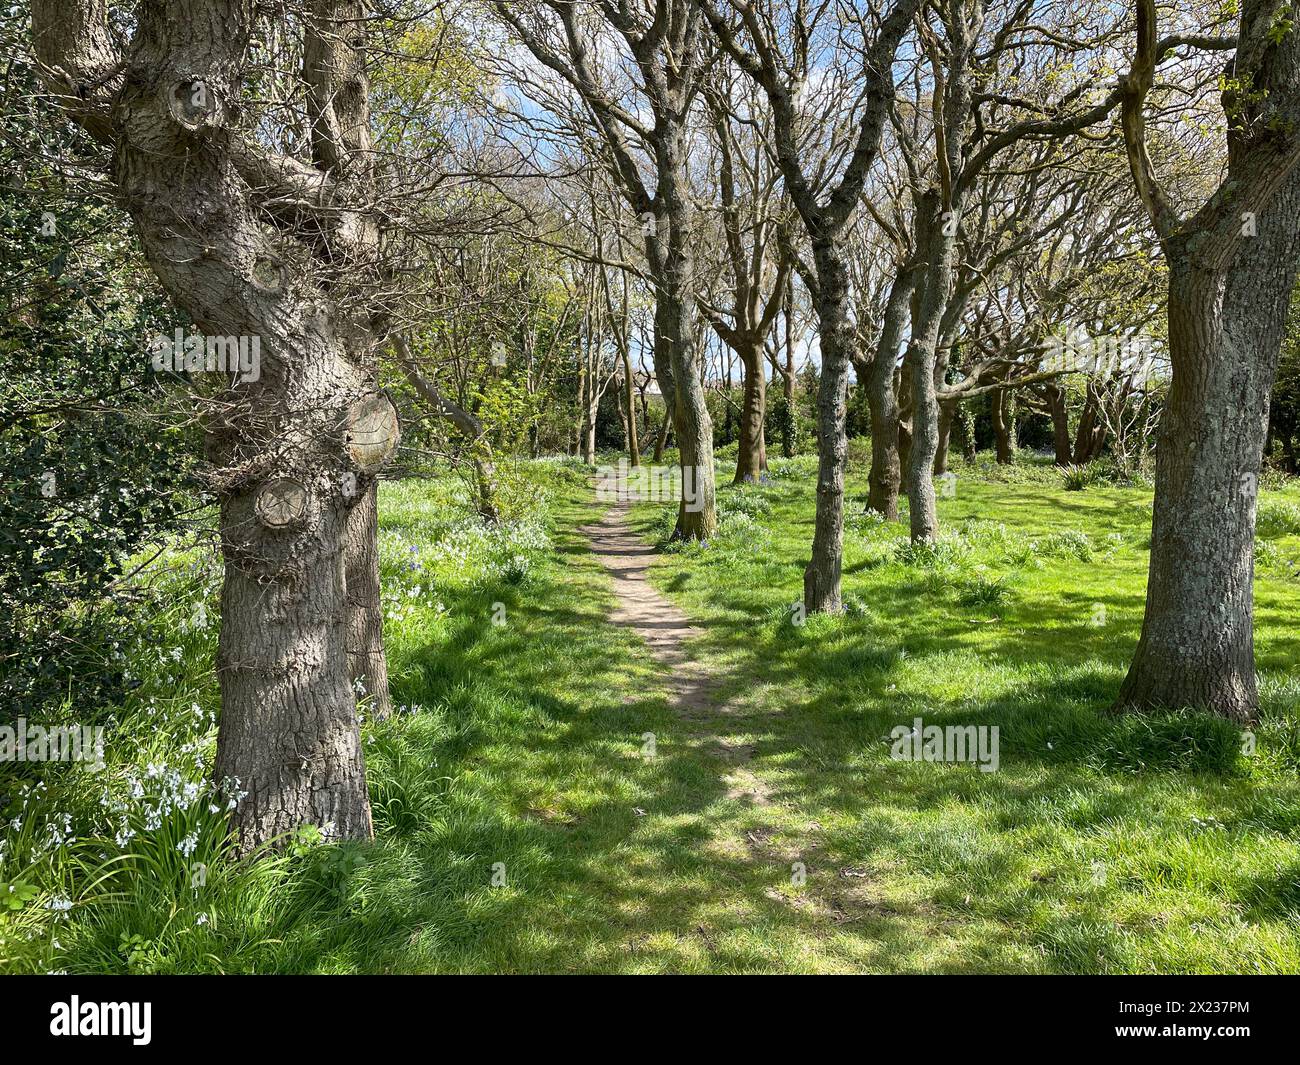 A woodland scene shows a footpath between the trees and housing in background.Nature.Suburban. Stock Photo